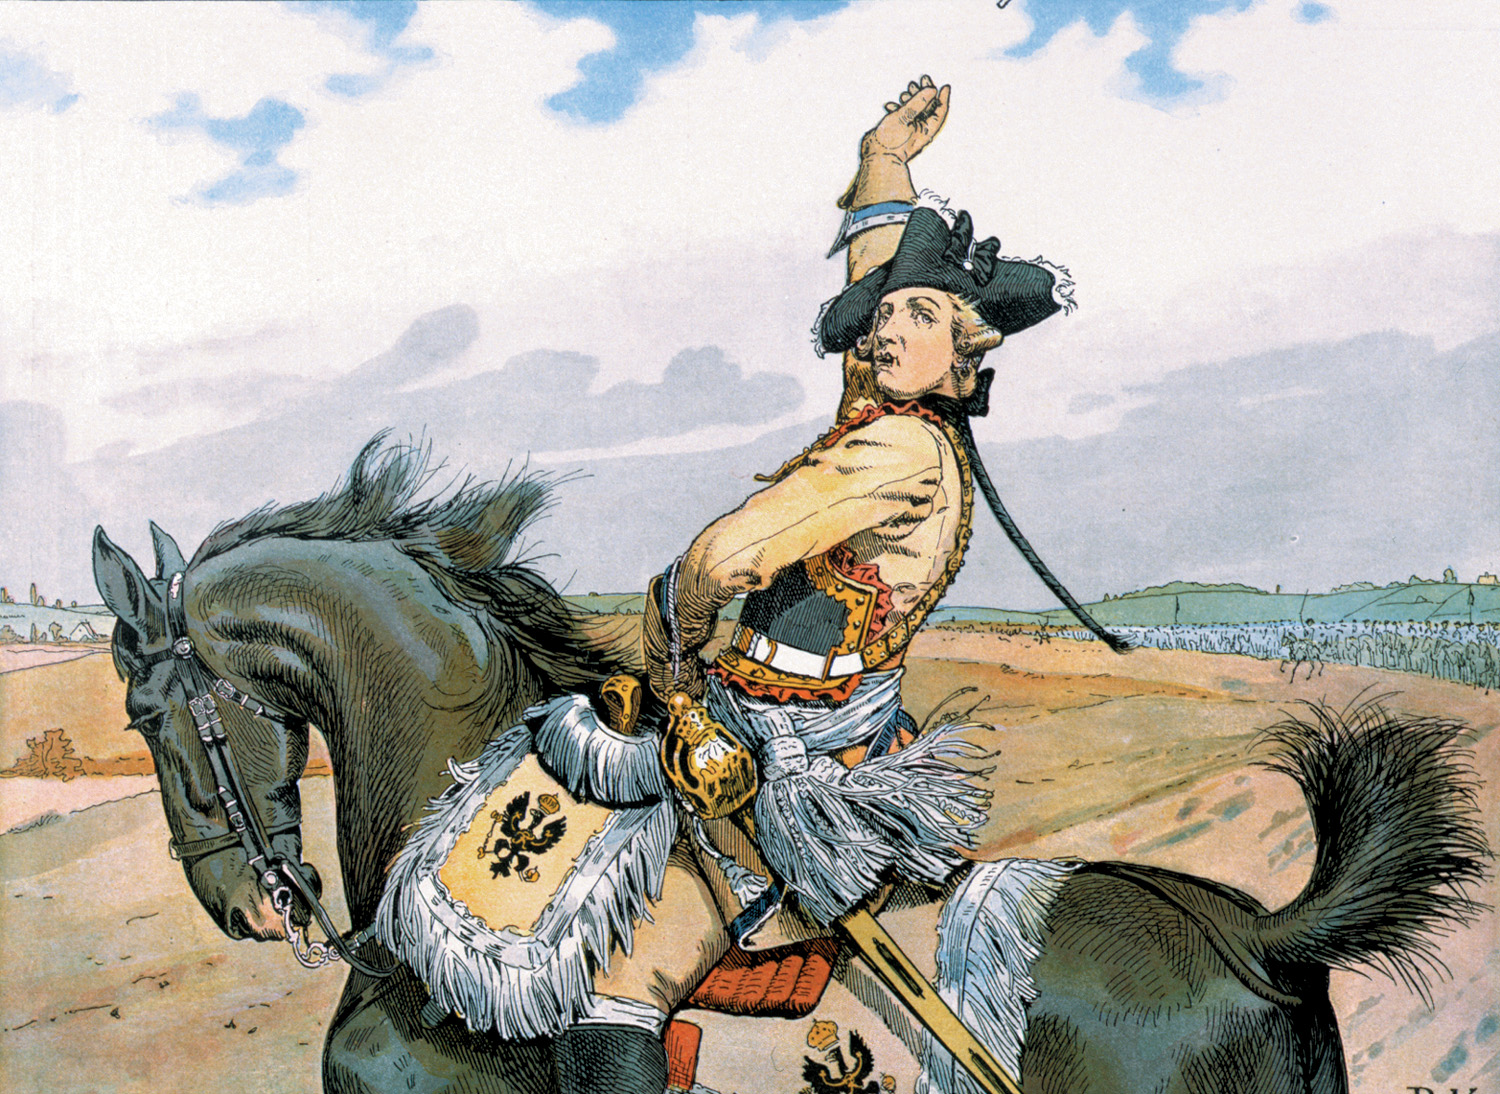 Throwing his tobacco pipe in the air, Seydlitz signals for the first cavalry attack, surprising the Austrian advance guard.